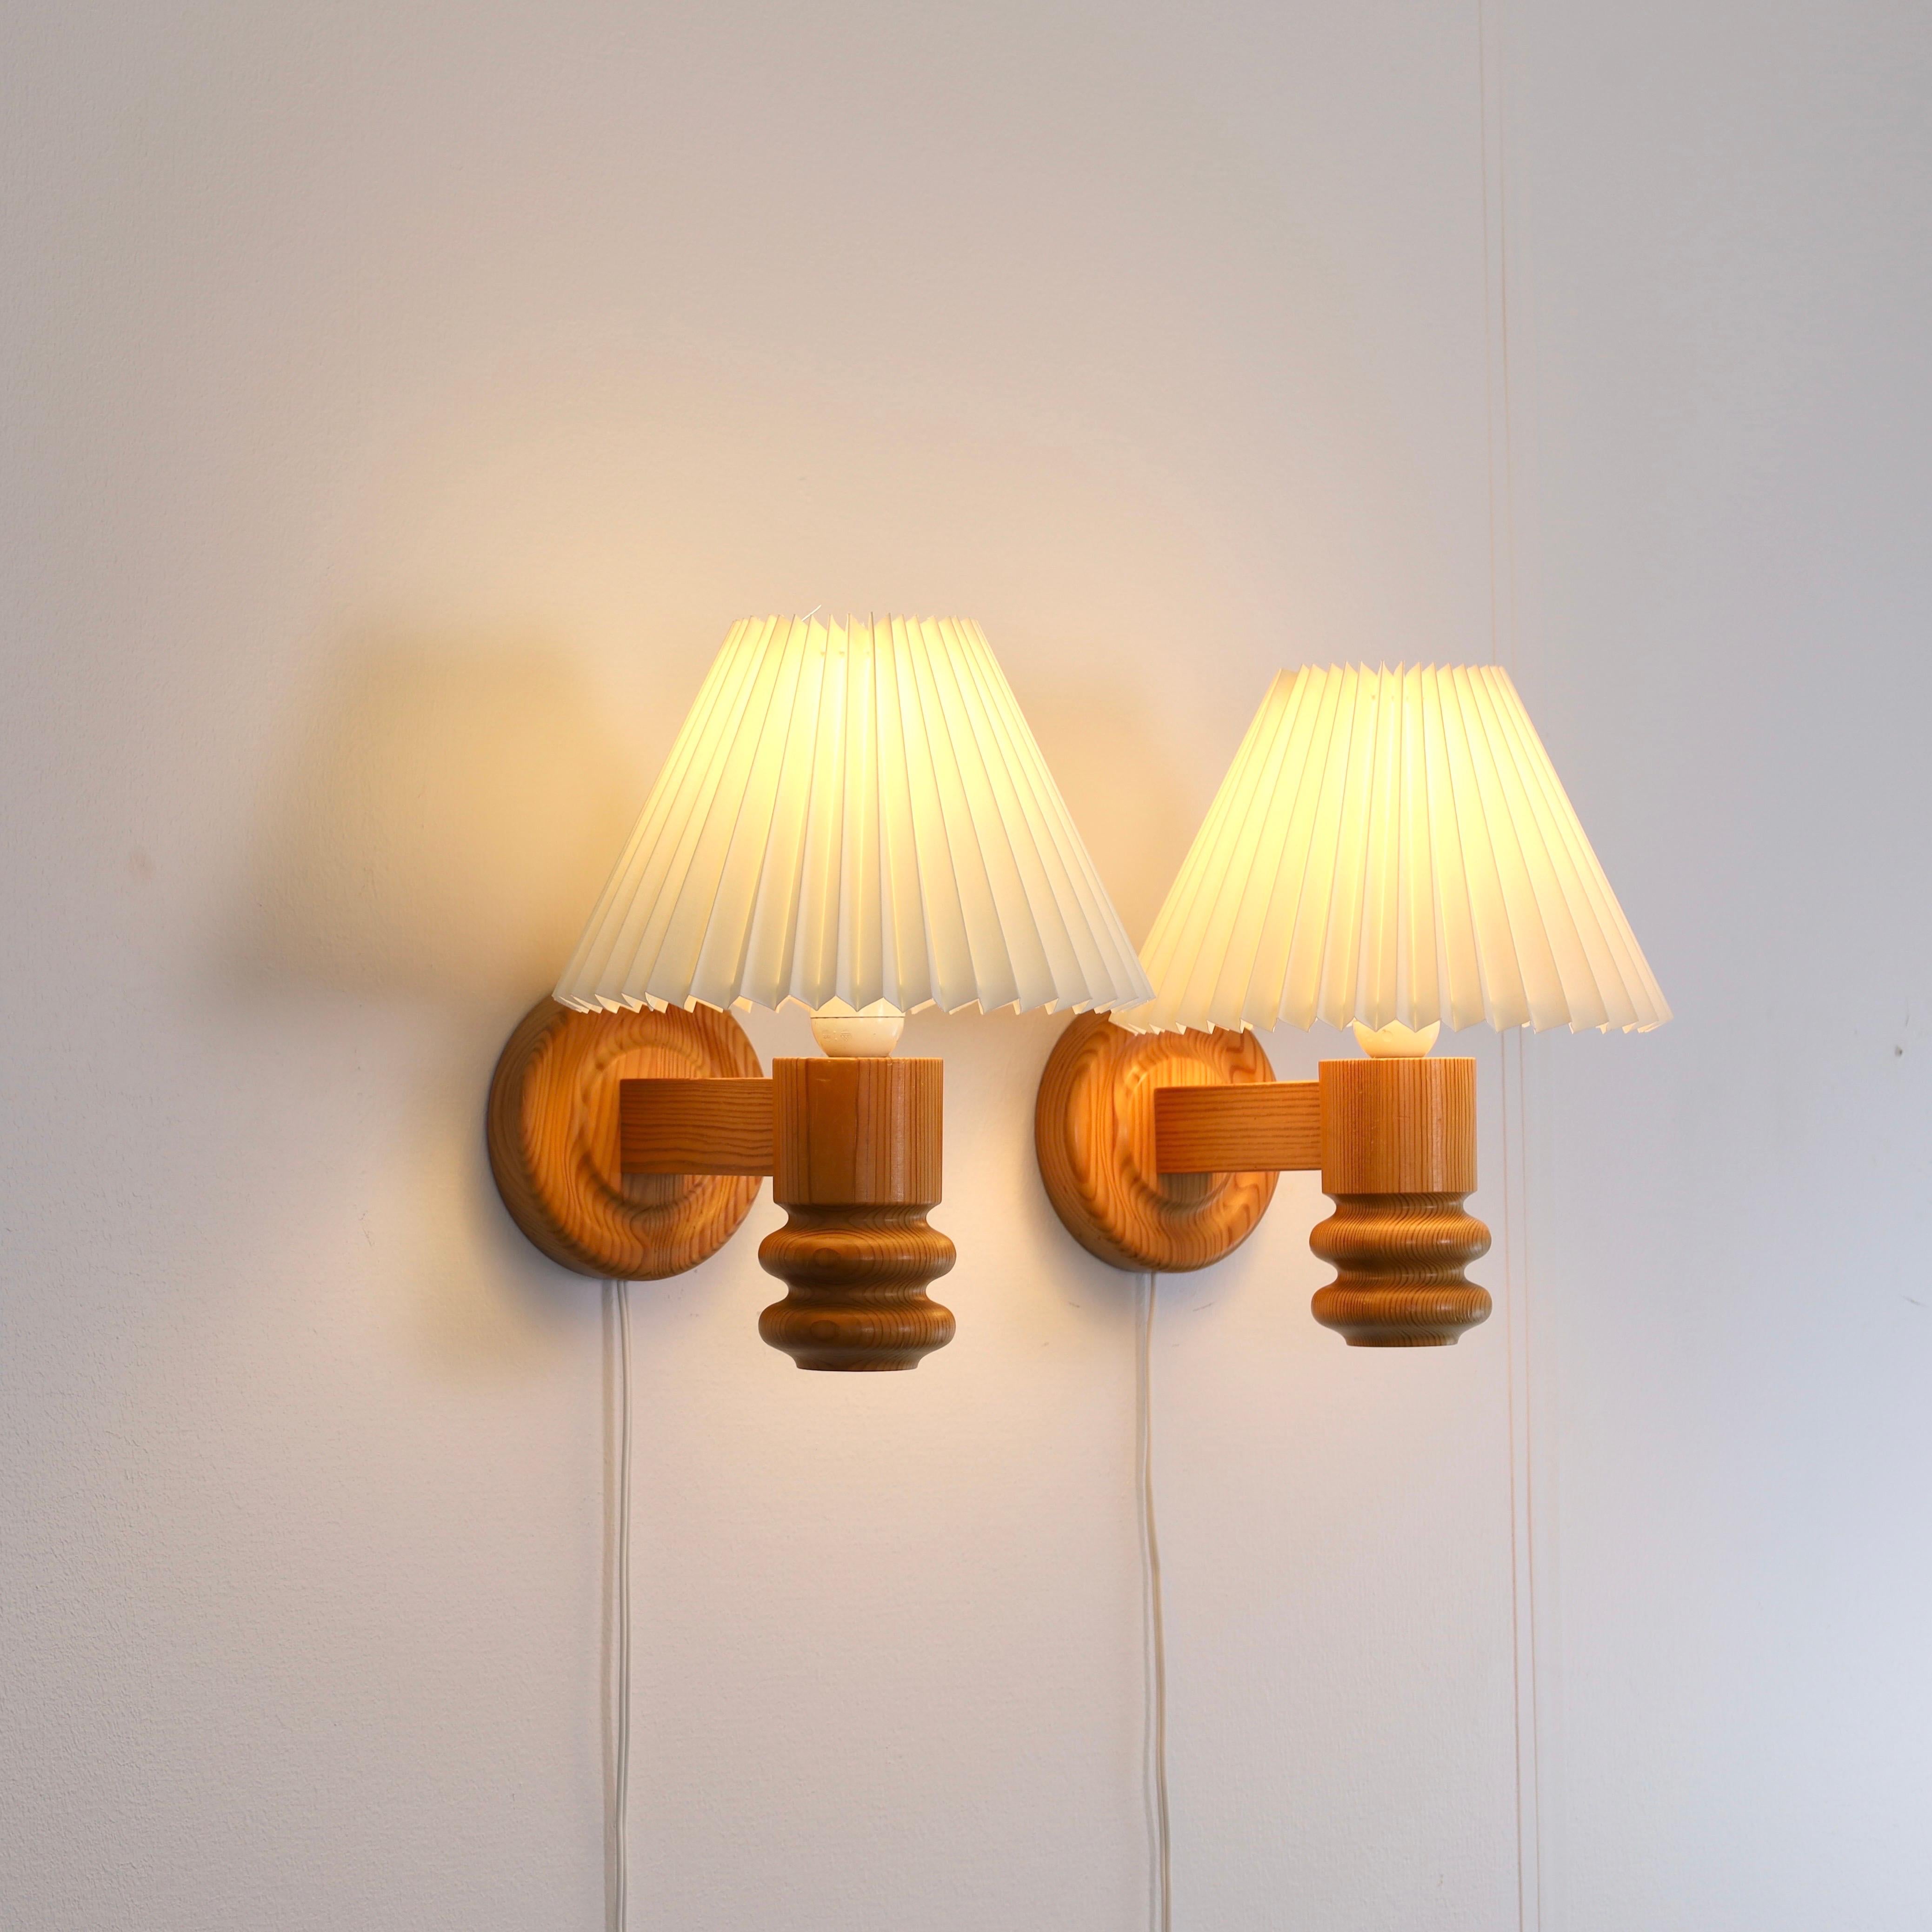 Set of Swedish Pine Wood Wall Lamps by Solbackens Svarveri, Sweden, 1970s In Fair Condition For Sale In Værløse, DK